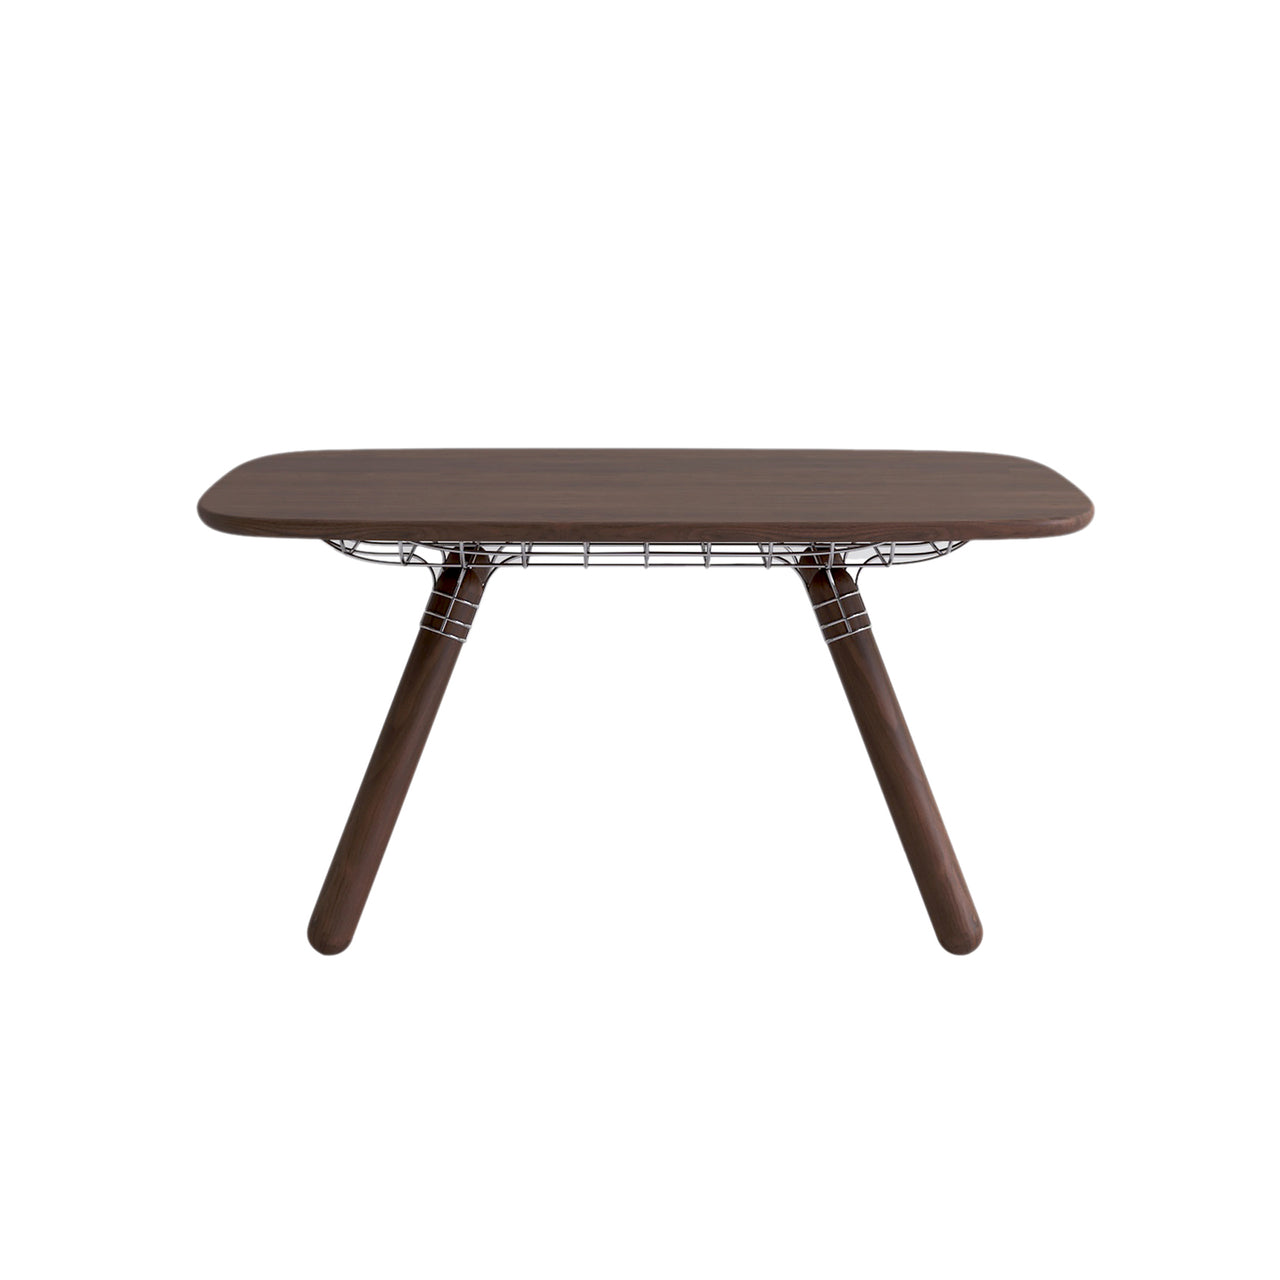 Magnum Dining Table: Small - 59.1